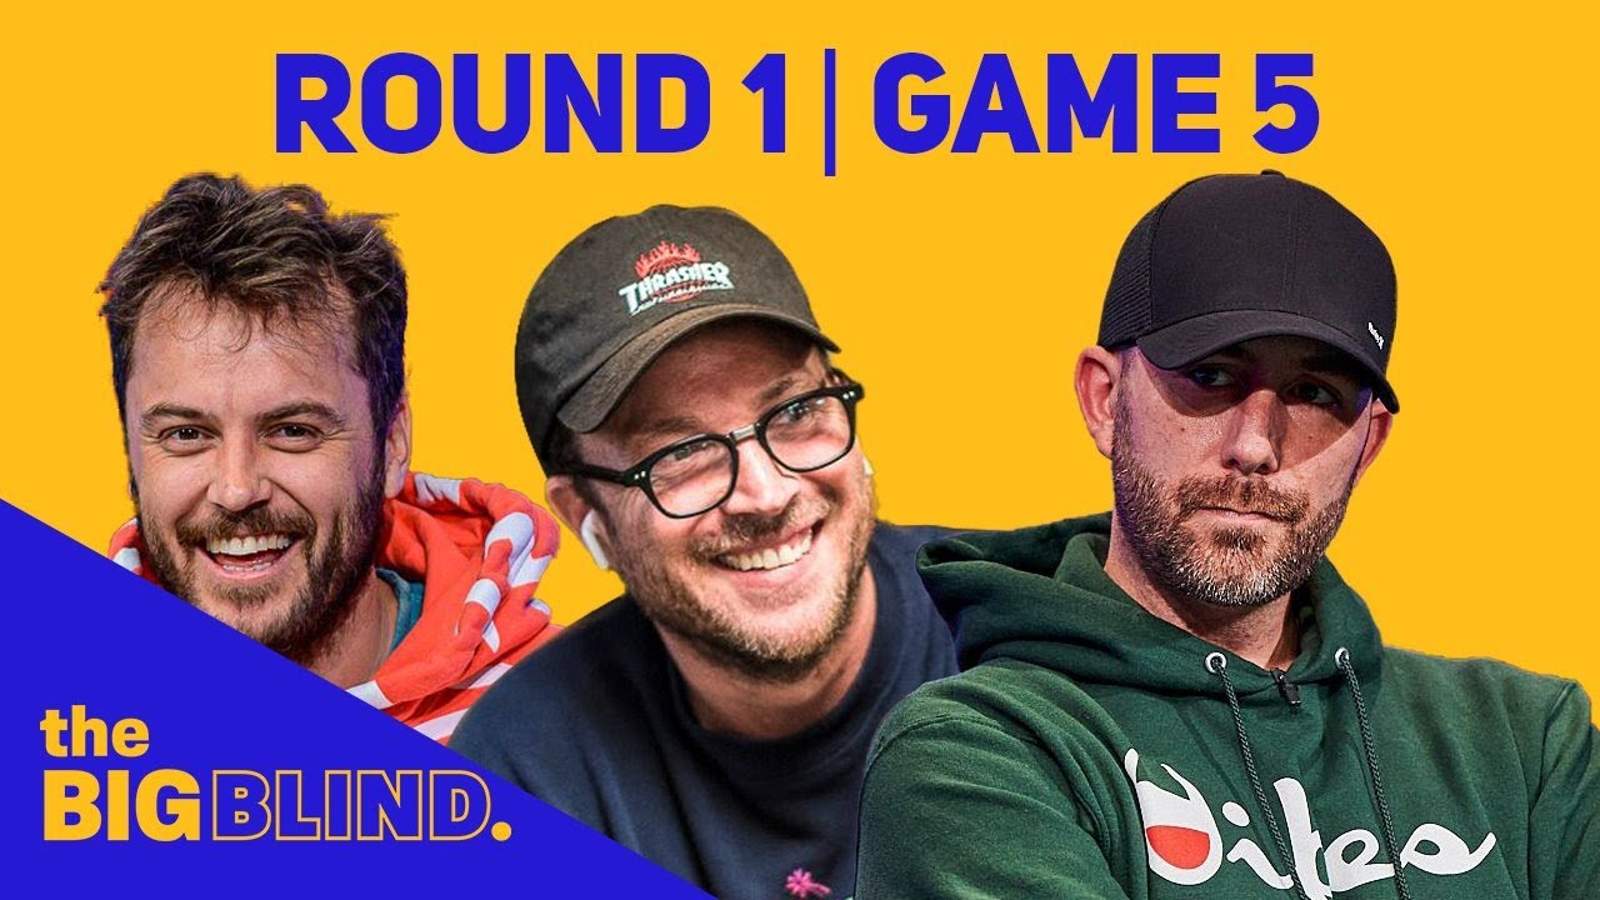 Rewatch Round 1 - Game 5 of The Big Blind on YouTube and Facebook